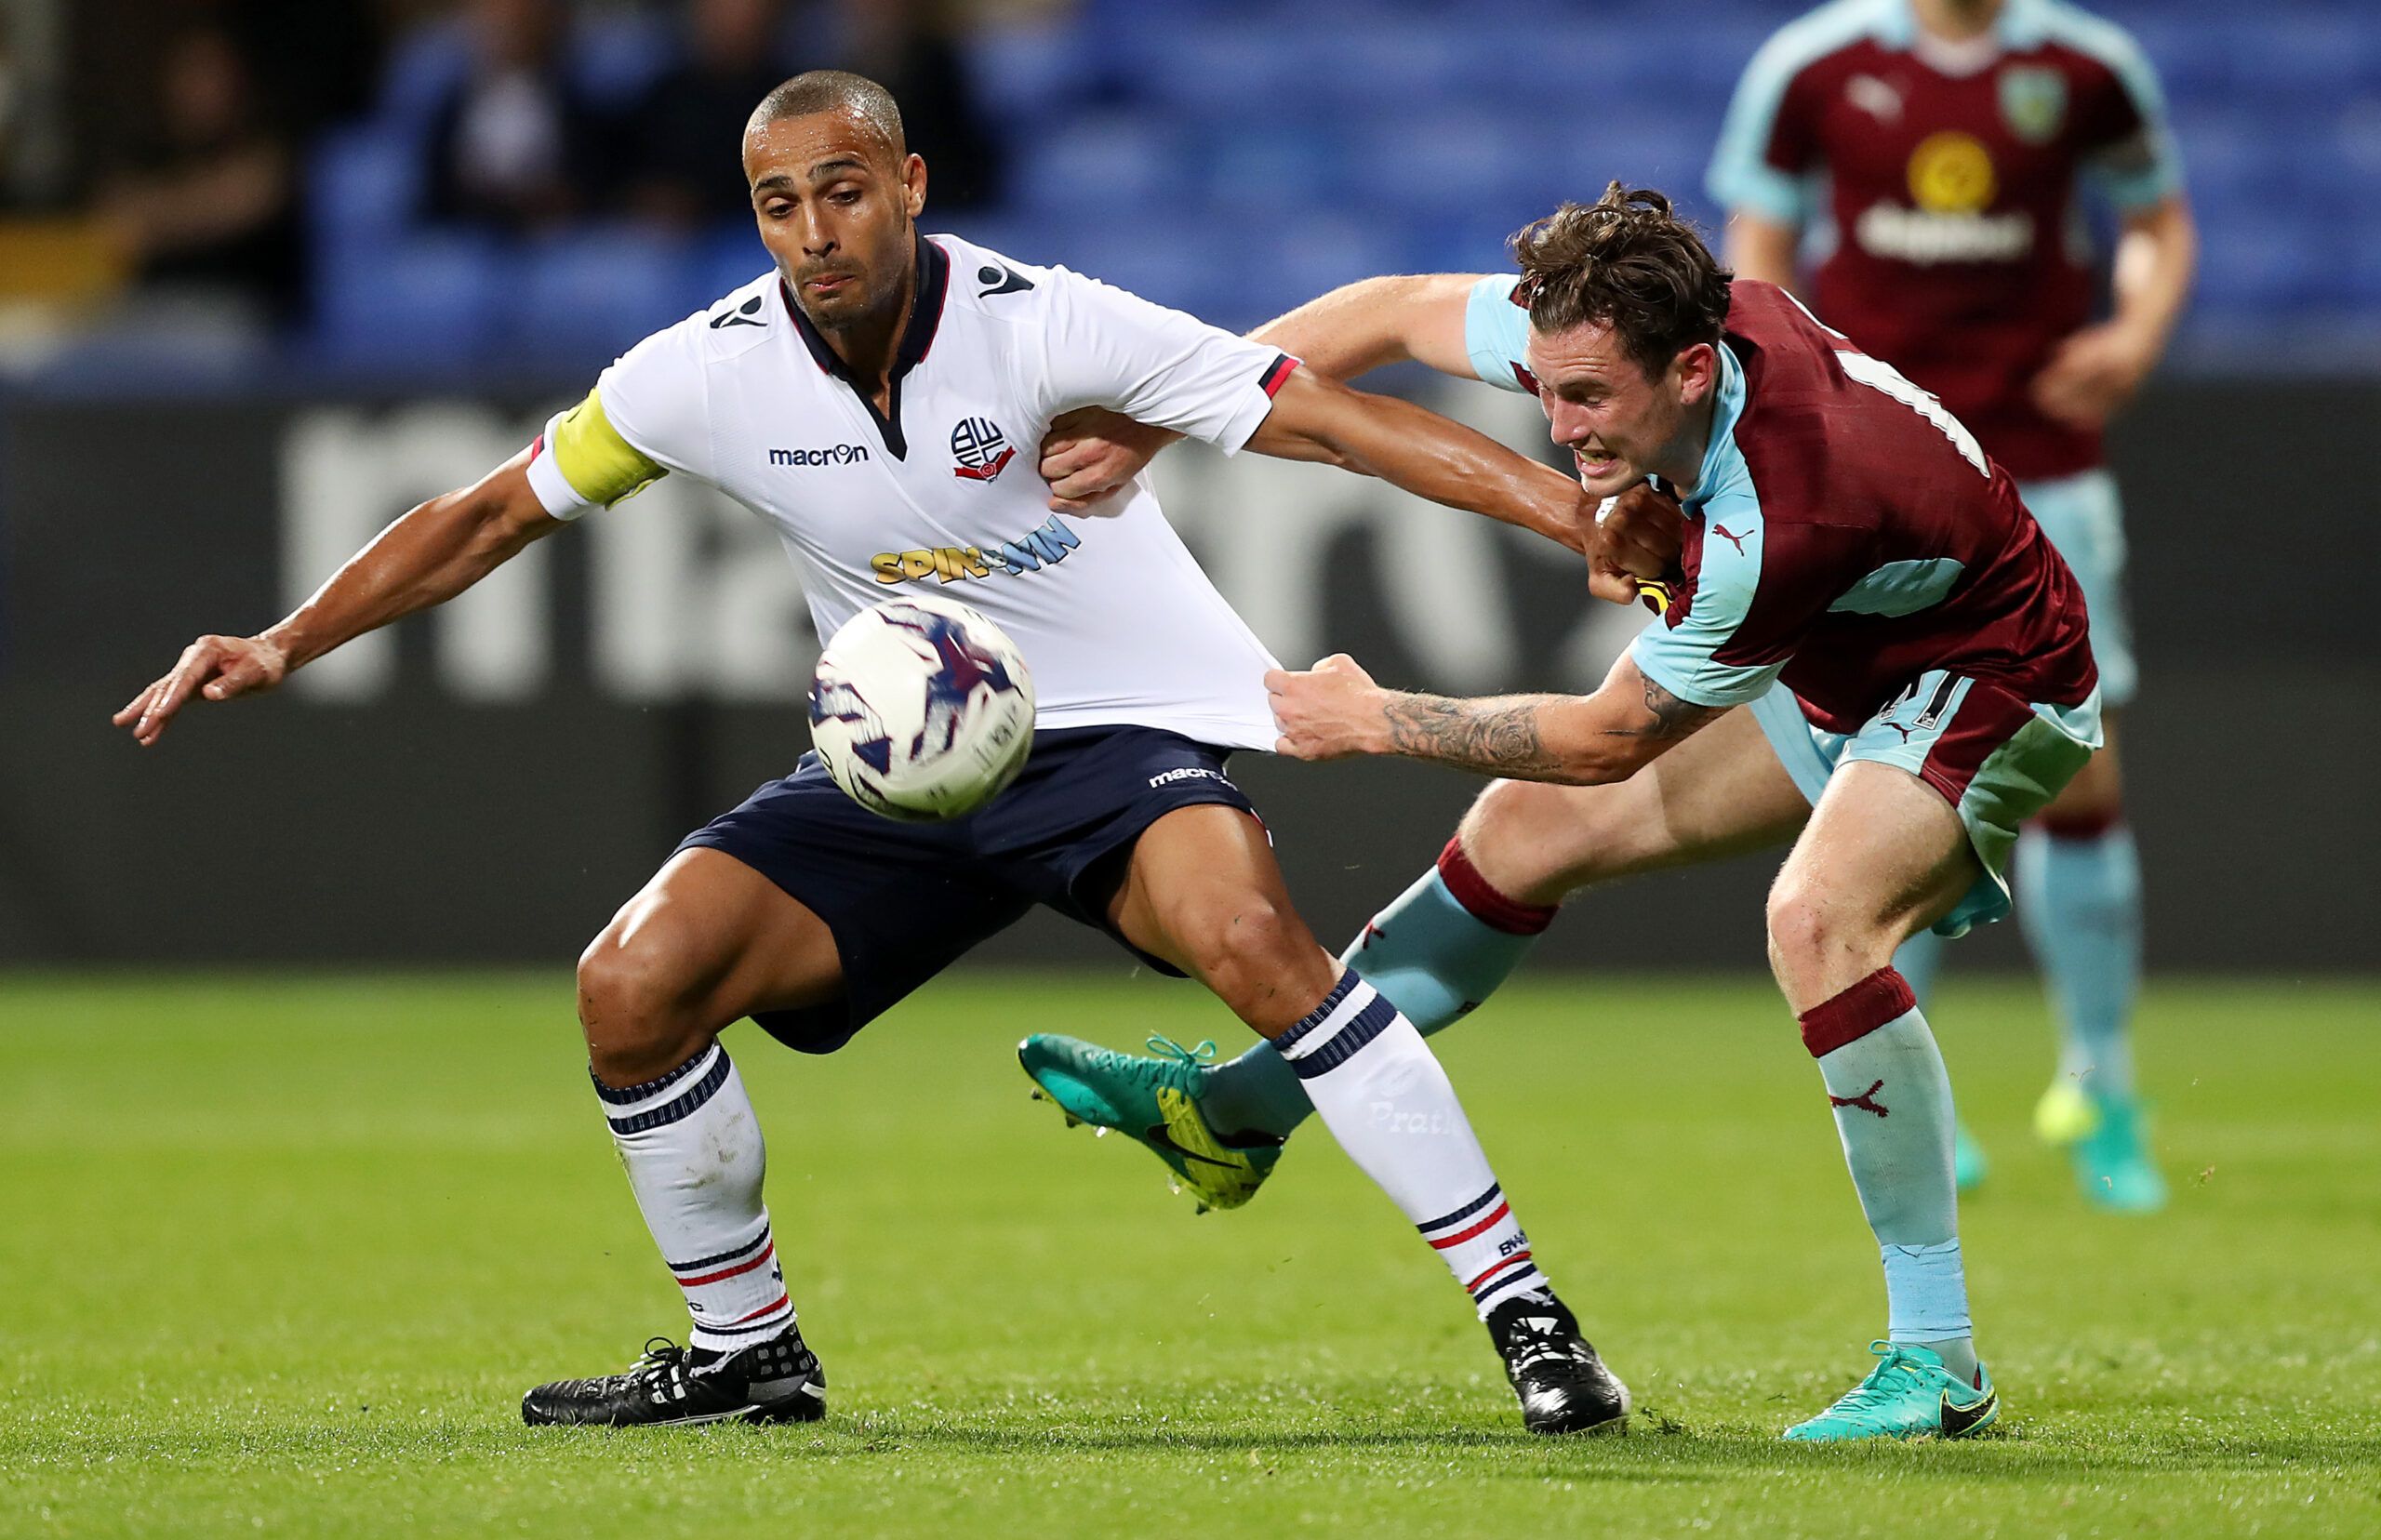 Britain Football Soccer - Bolton Wanderers v Burnley - Pre Season Friendly - Macron Stadium - 26/7/16 
Aiden ONeill of Burnley in action with Darren Pratley of Bolton Wanderers 
Action Images via Reuters / John Clifton 
Livepic 
EDITORIAL USE ONLY.